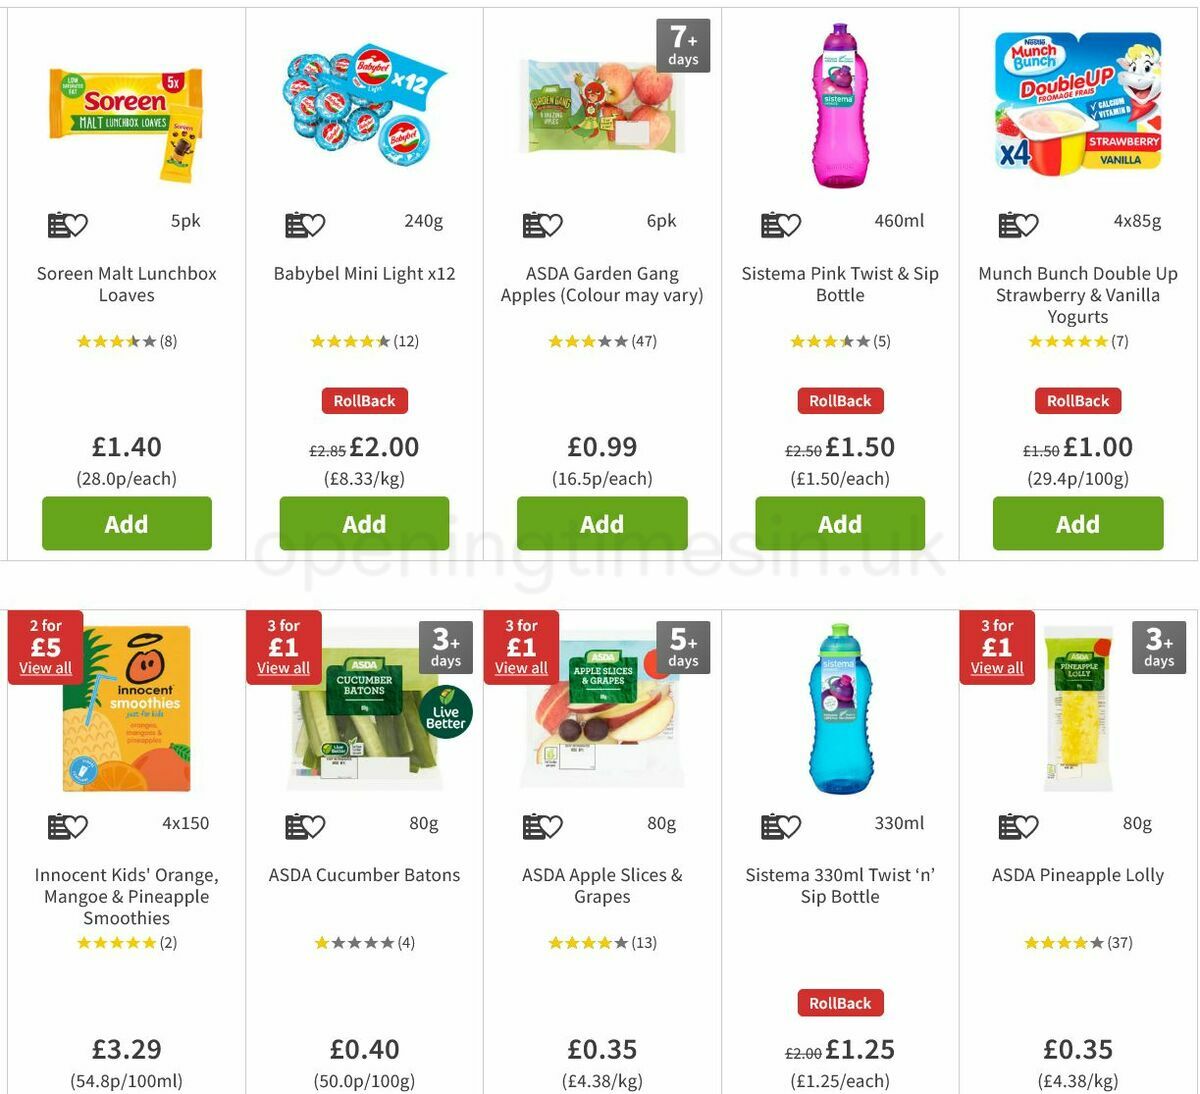 ASDA Back to School Offers from 19 August